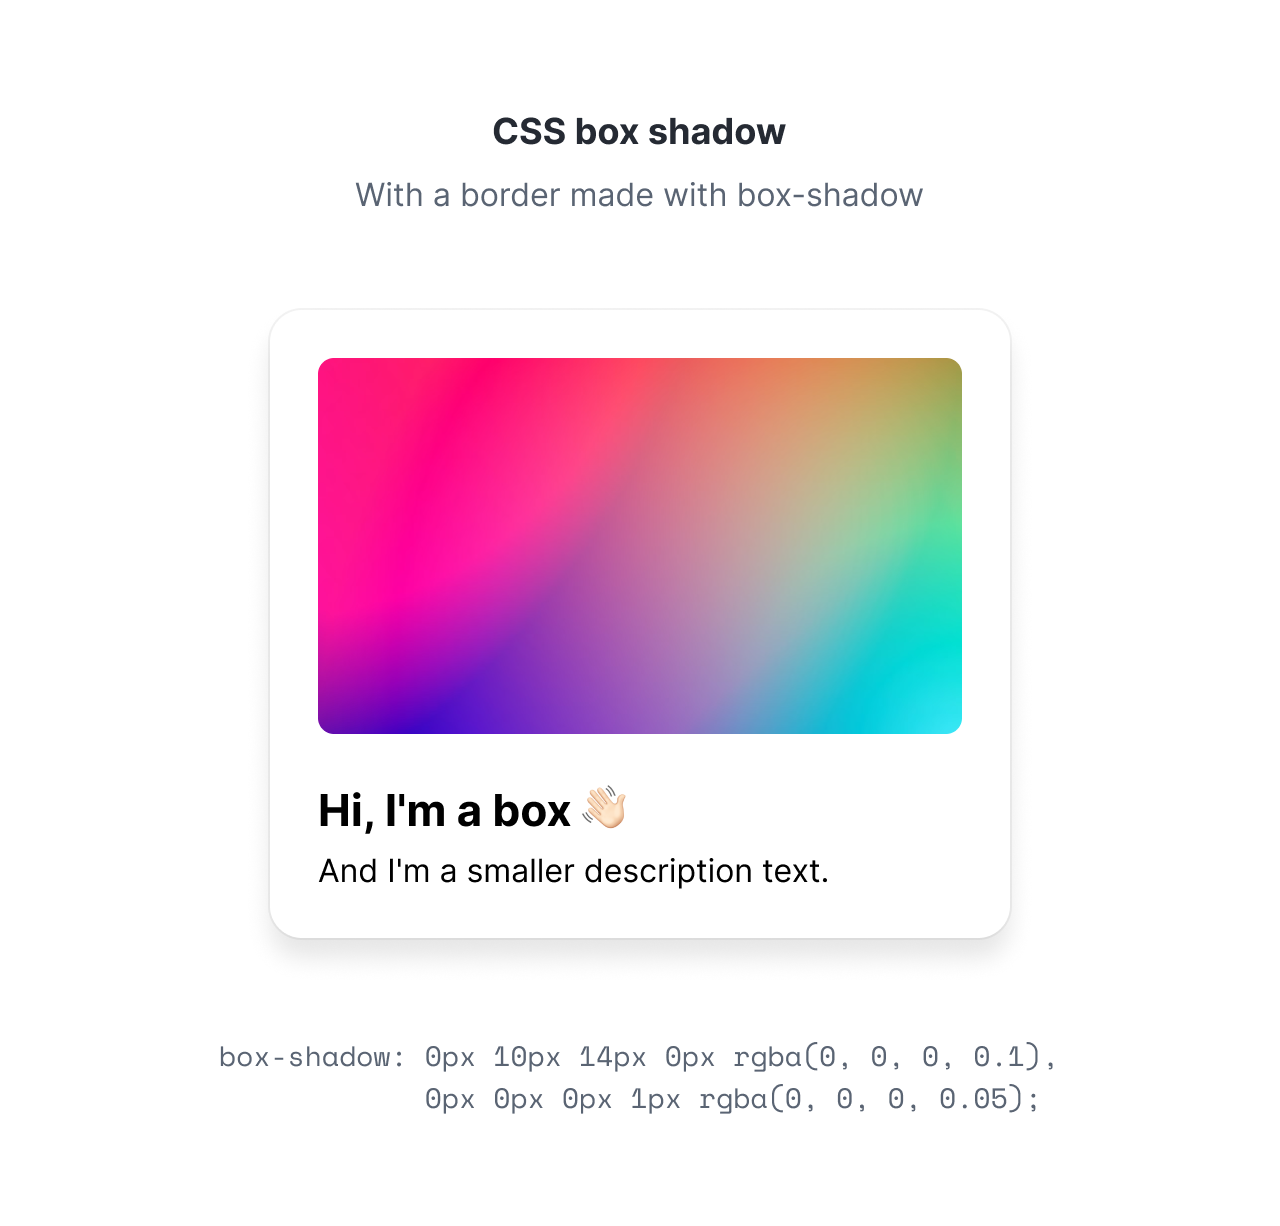 A card component with a double CSS box shadow, creating both elevation and a border.